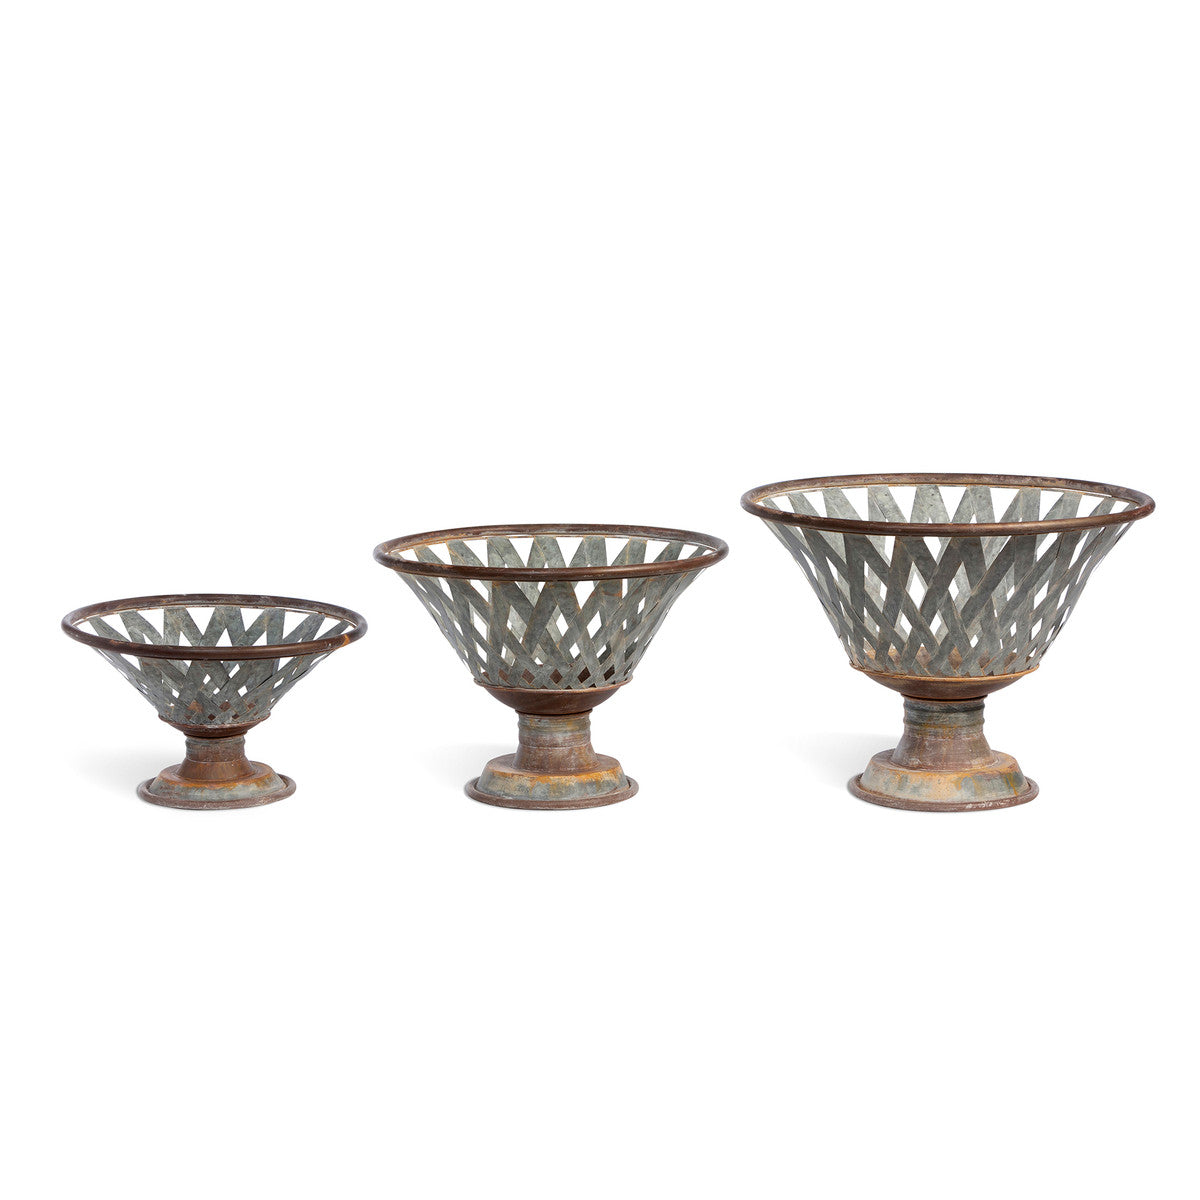 set of three woven metal footed bowl planters side by side